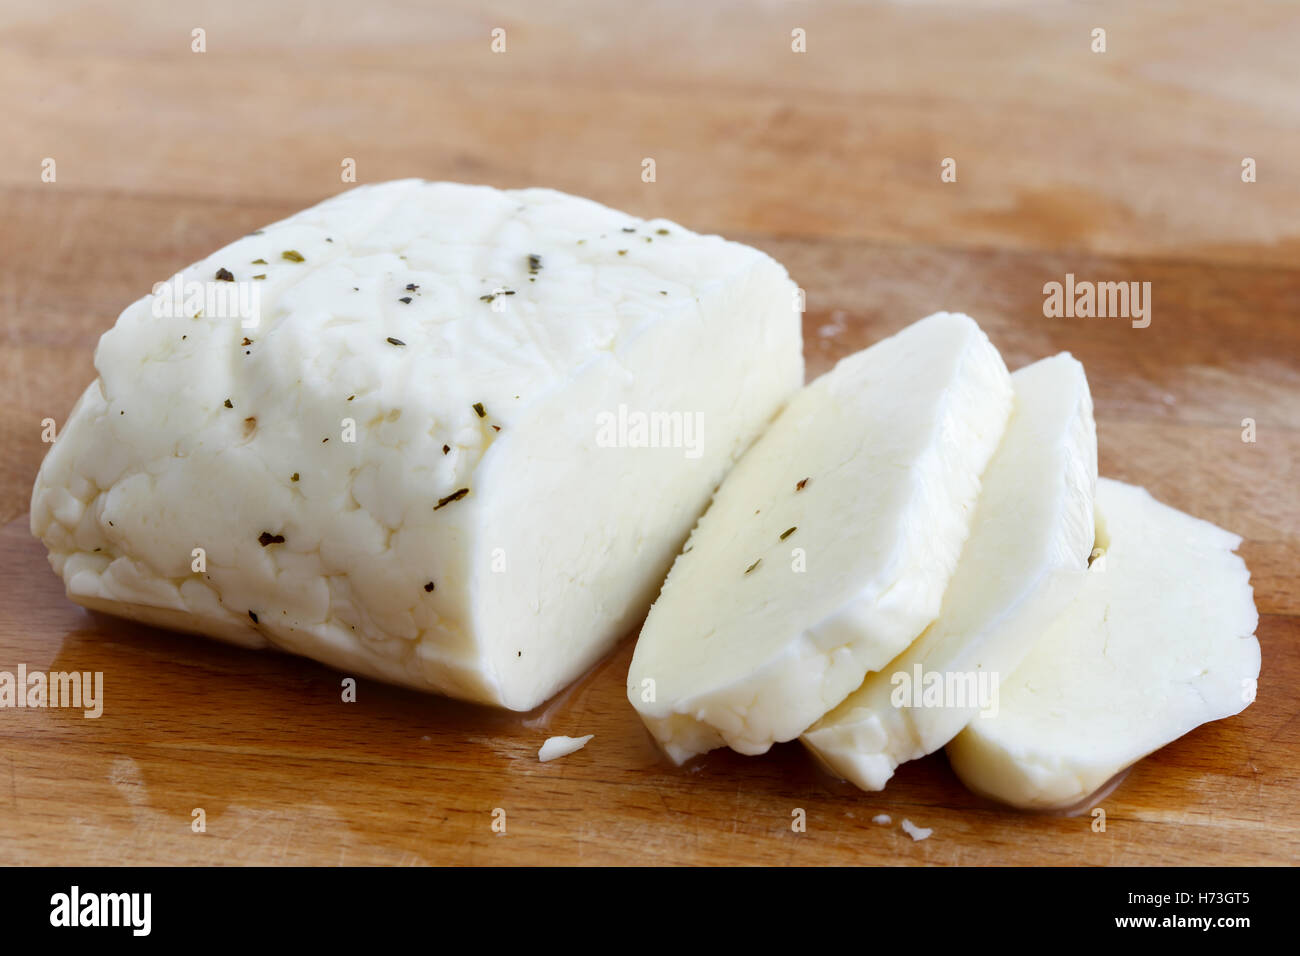 Sliced halloumi cheese with mint on wooden board in perspective. Stock Photo